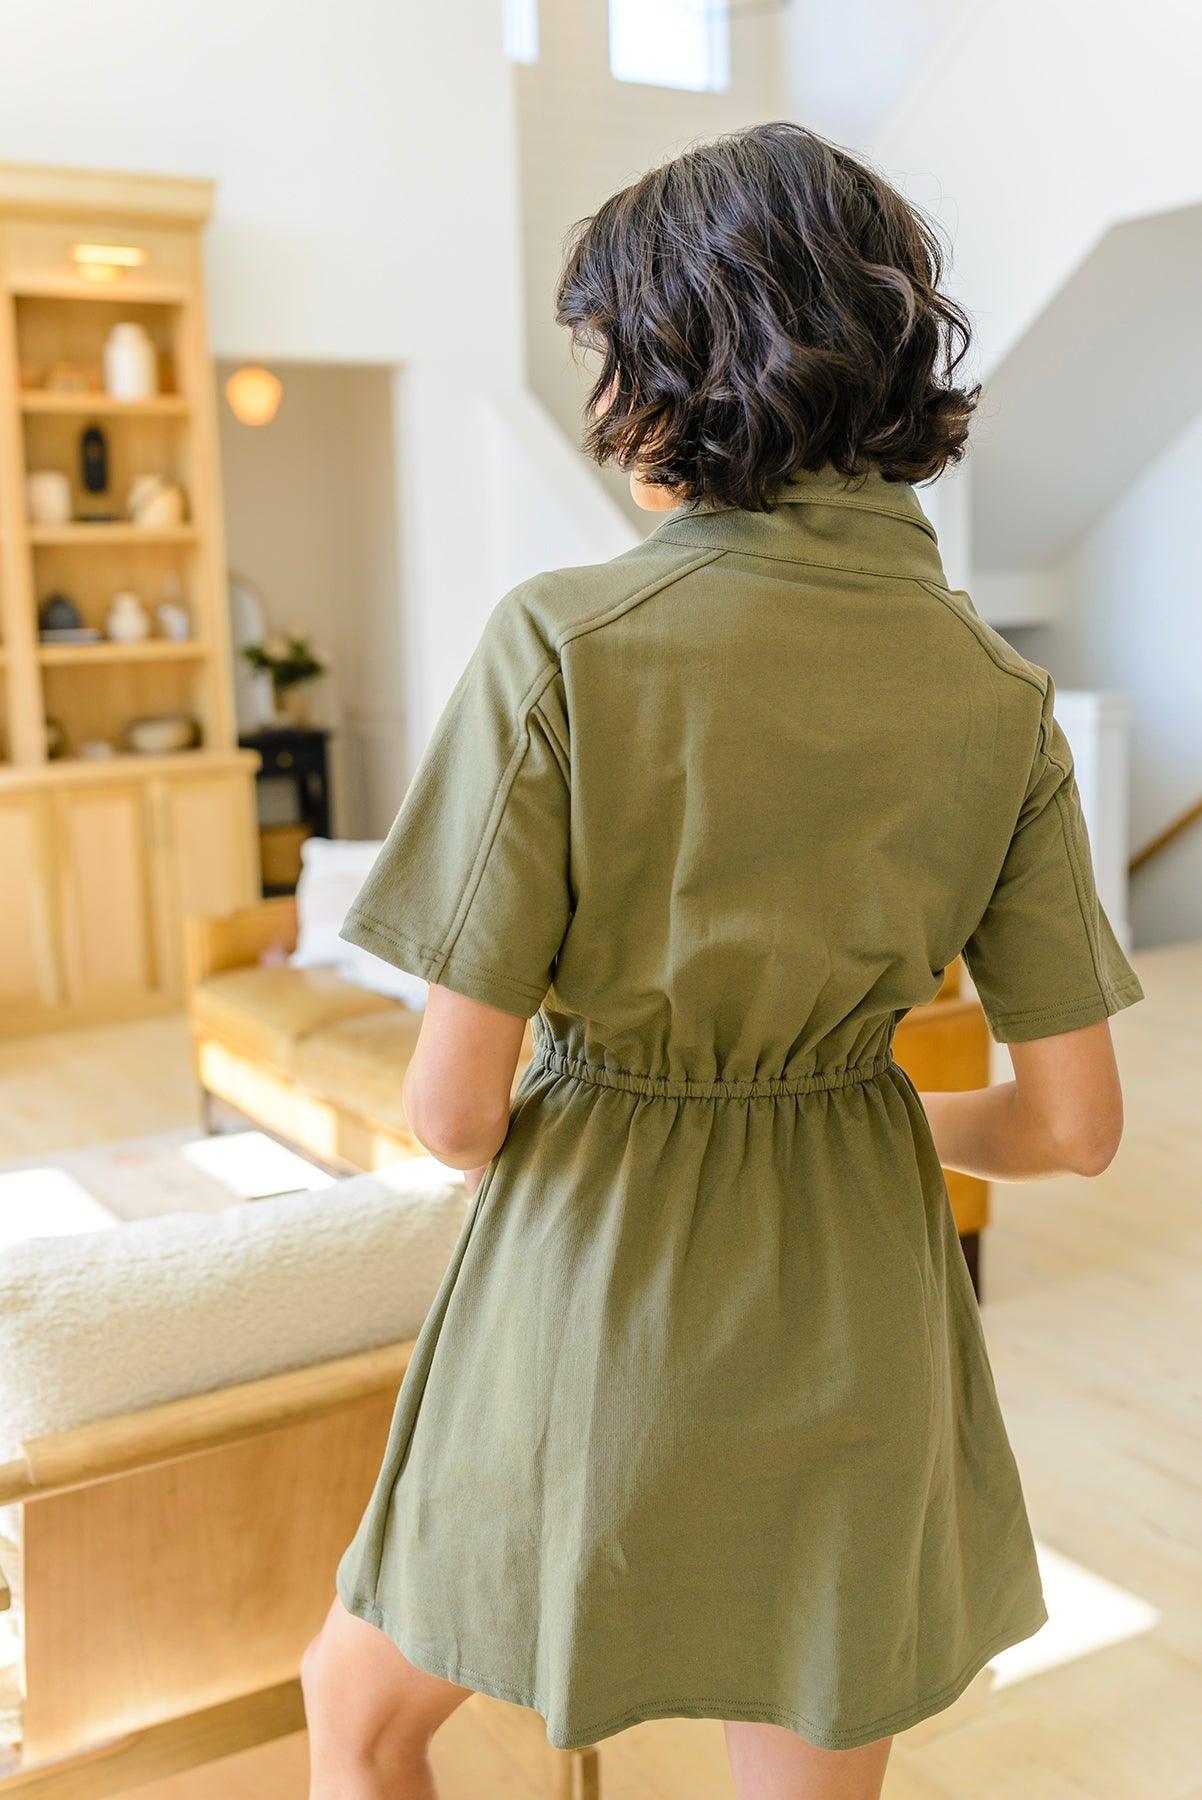 Darla Button Up Collared Dress in Olive - The Fiery Jasmine